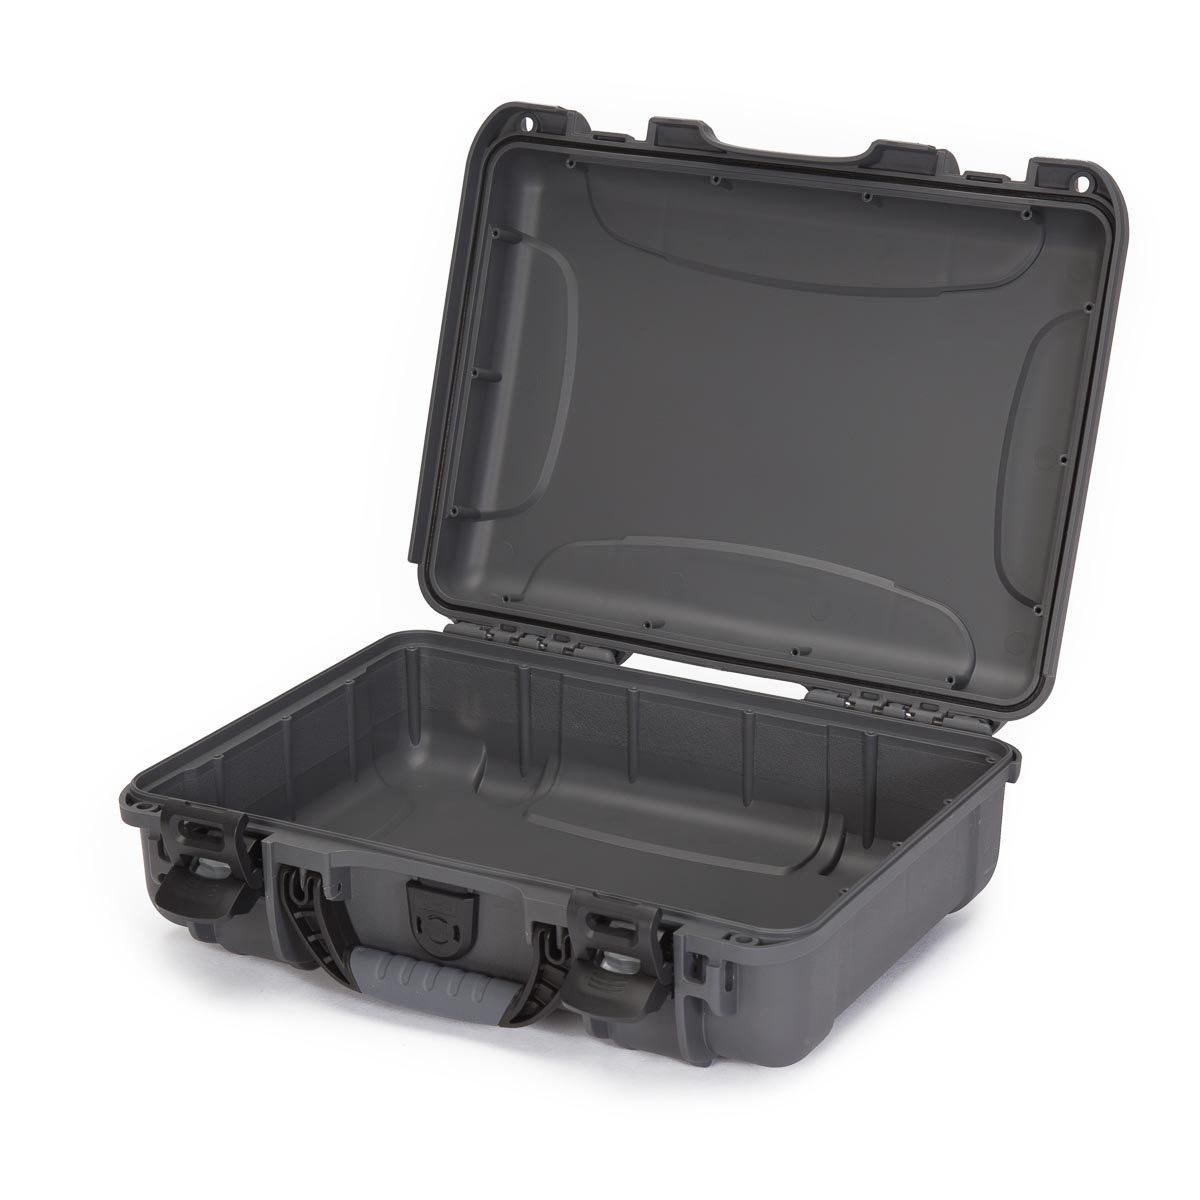 Condition 1 18 Medium Waterproof Hard Case with Foam, Portable Protective  Storage Box for Travel, Camera, Electronics, Tools, Tactical Gear, 18 x